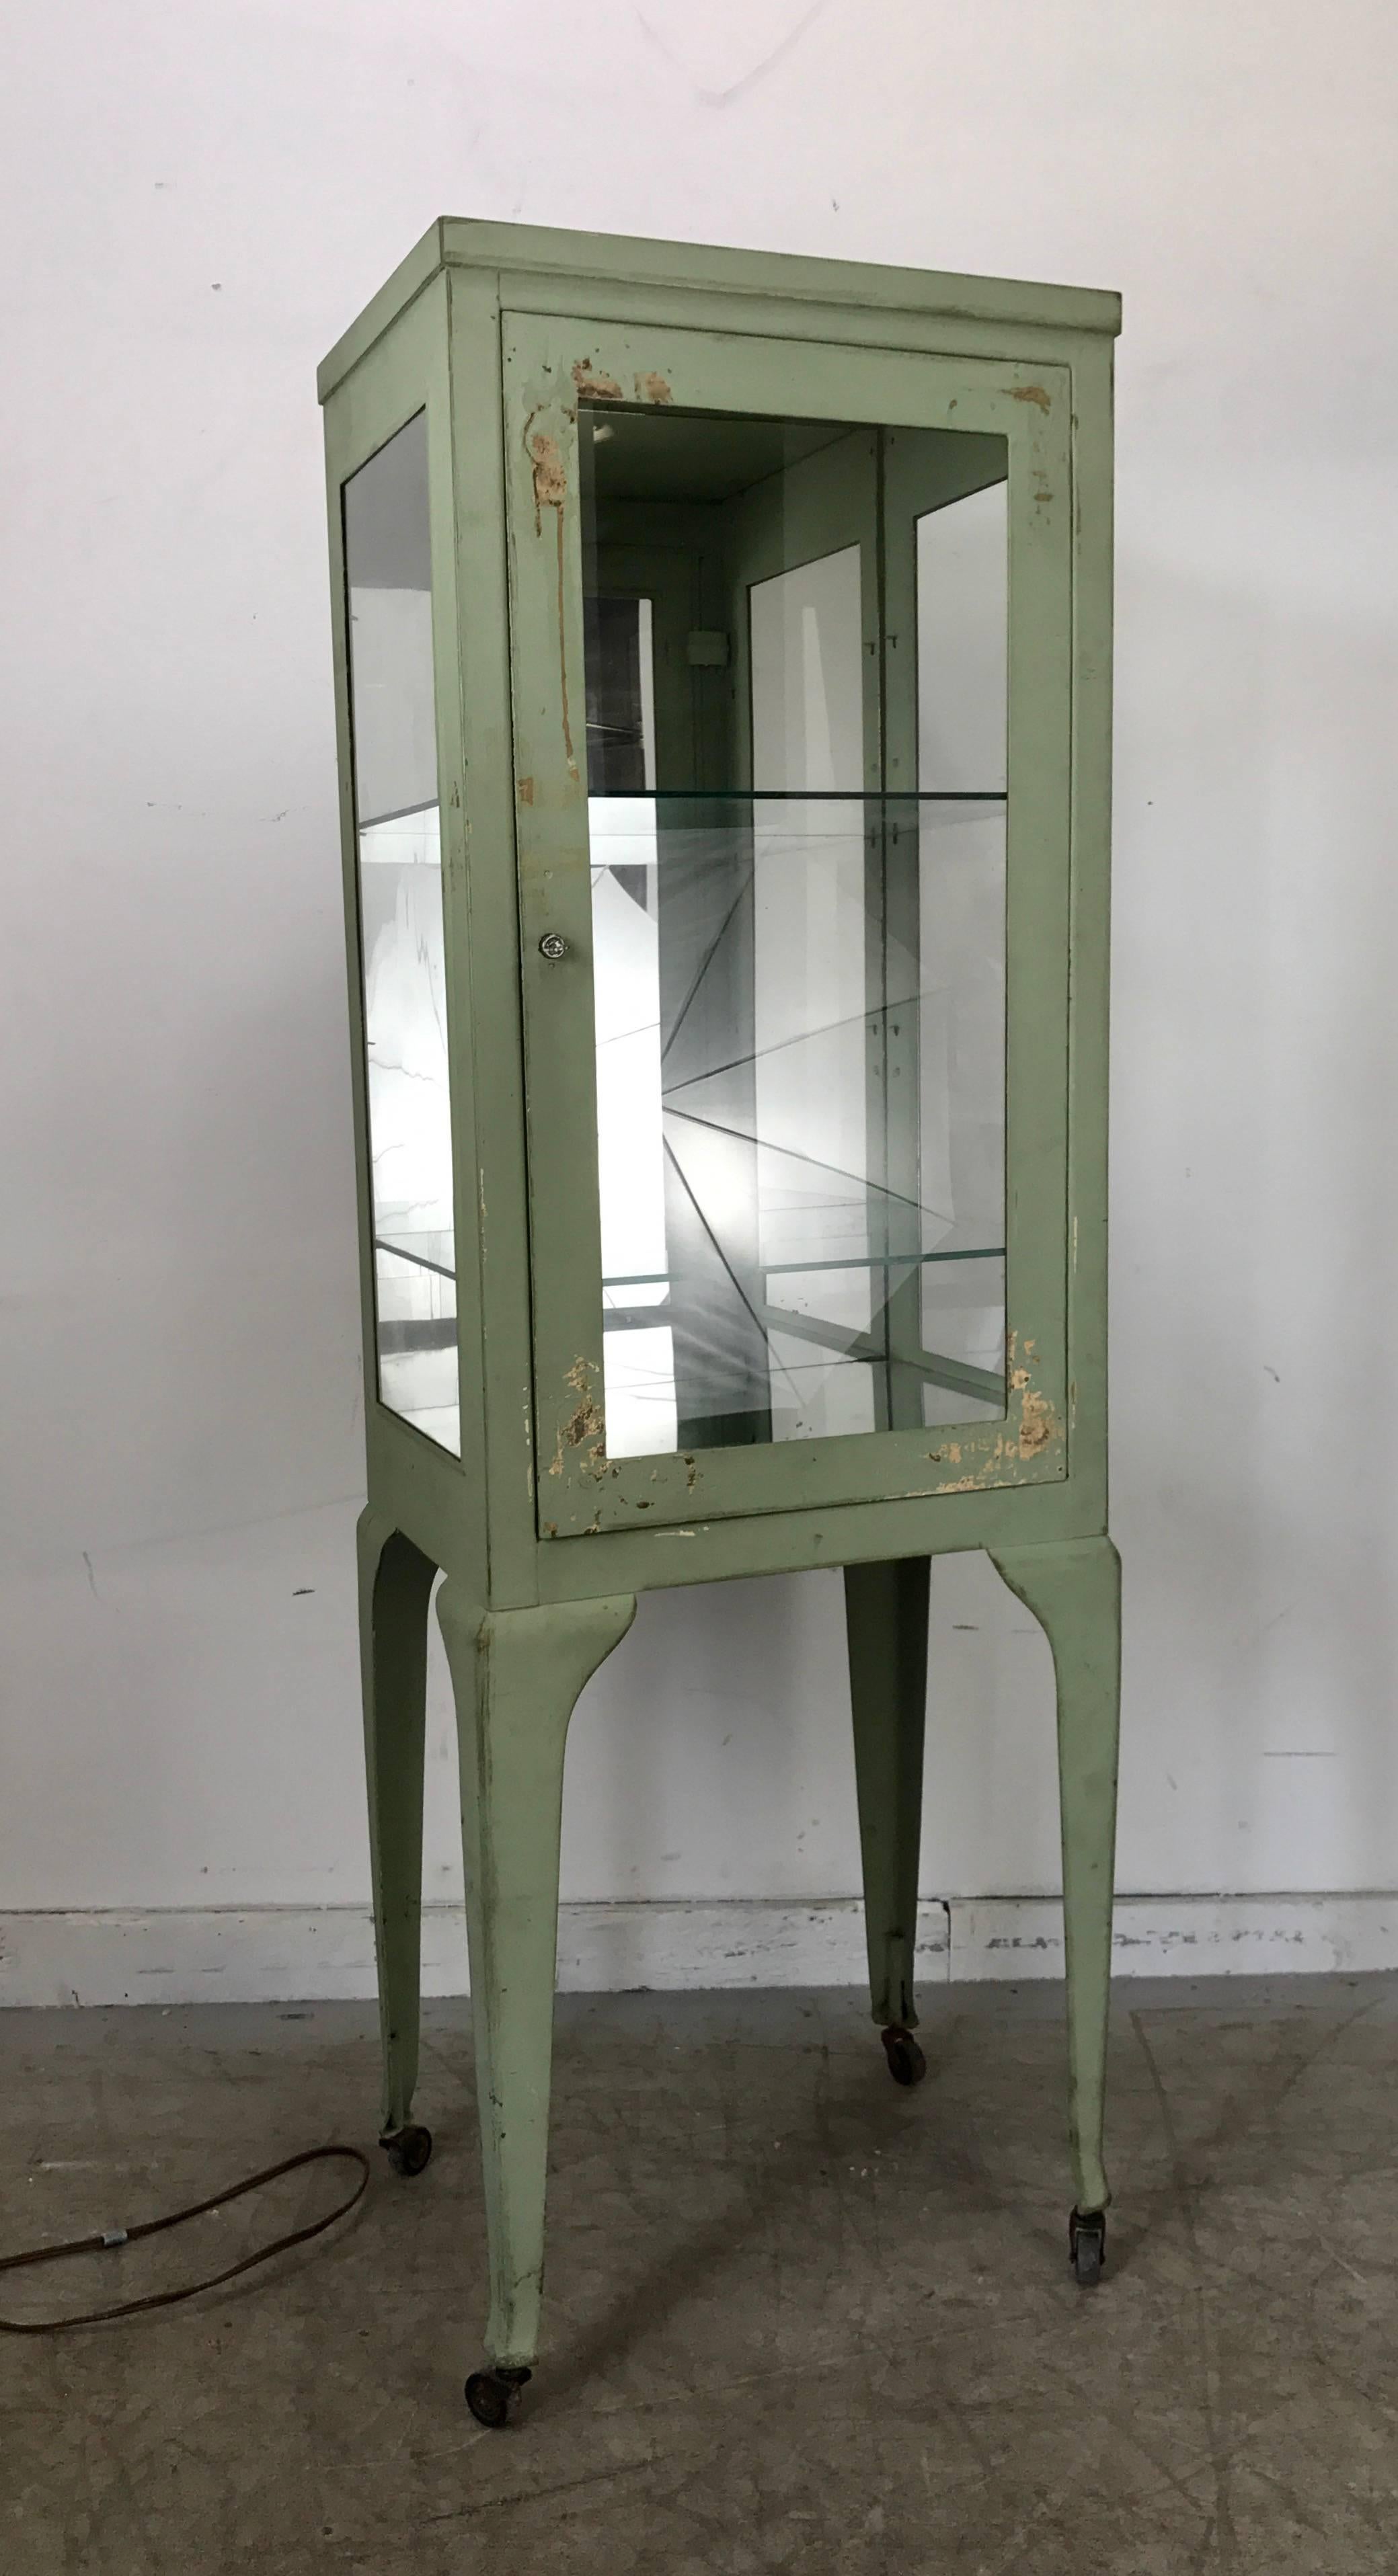 Painted Classic 1920s Metal and Glass Specimen Cabinet, Medical, Industrial